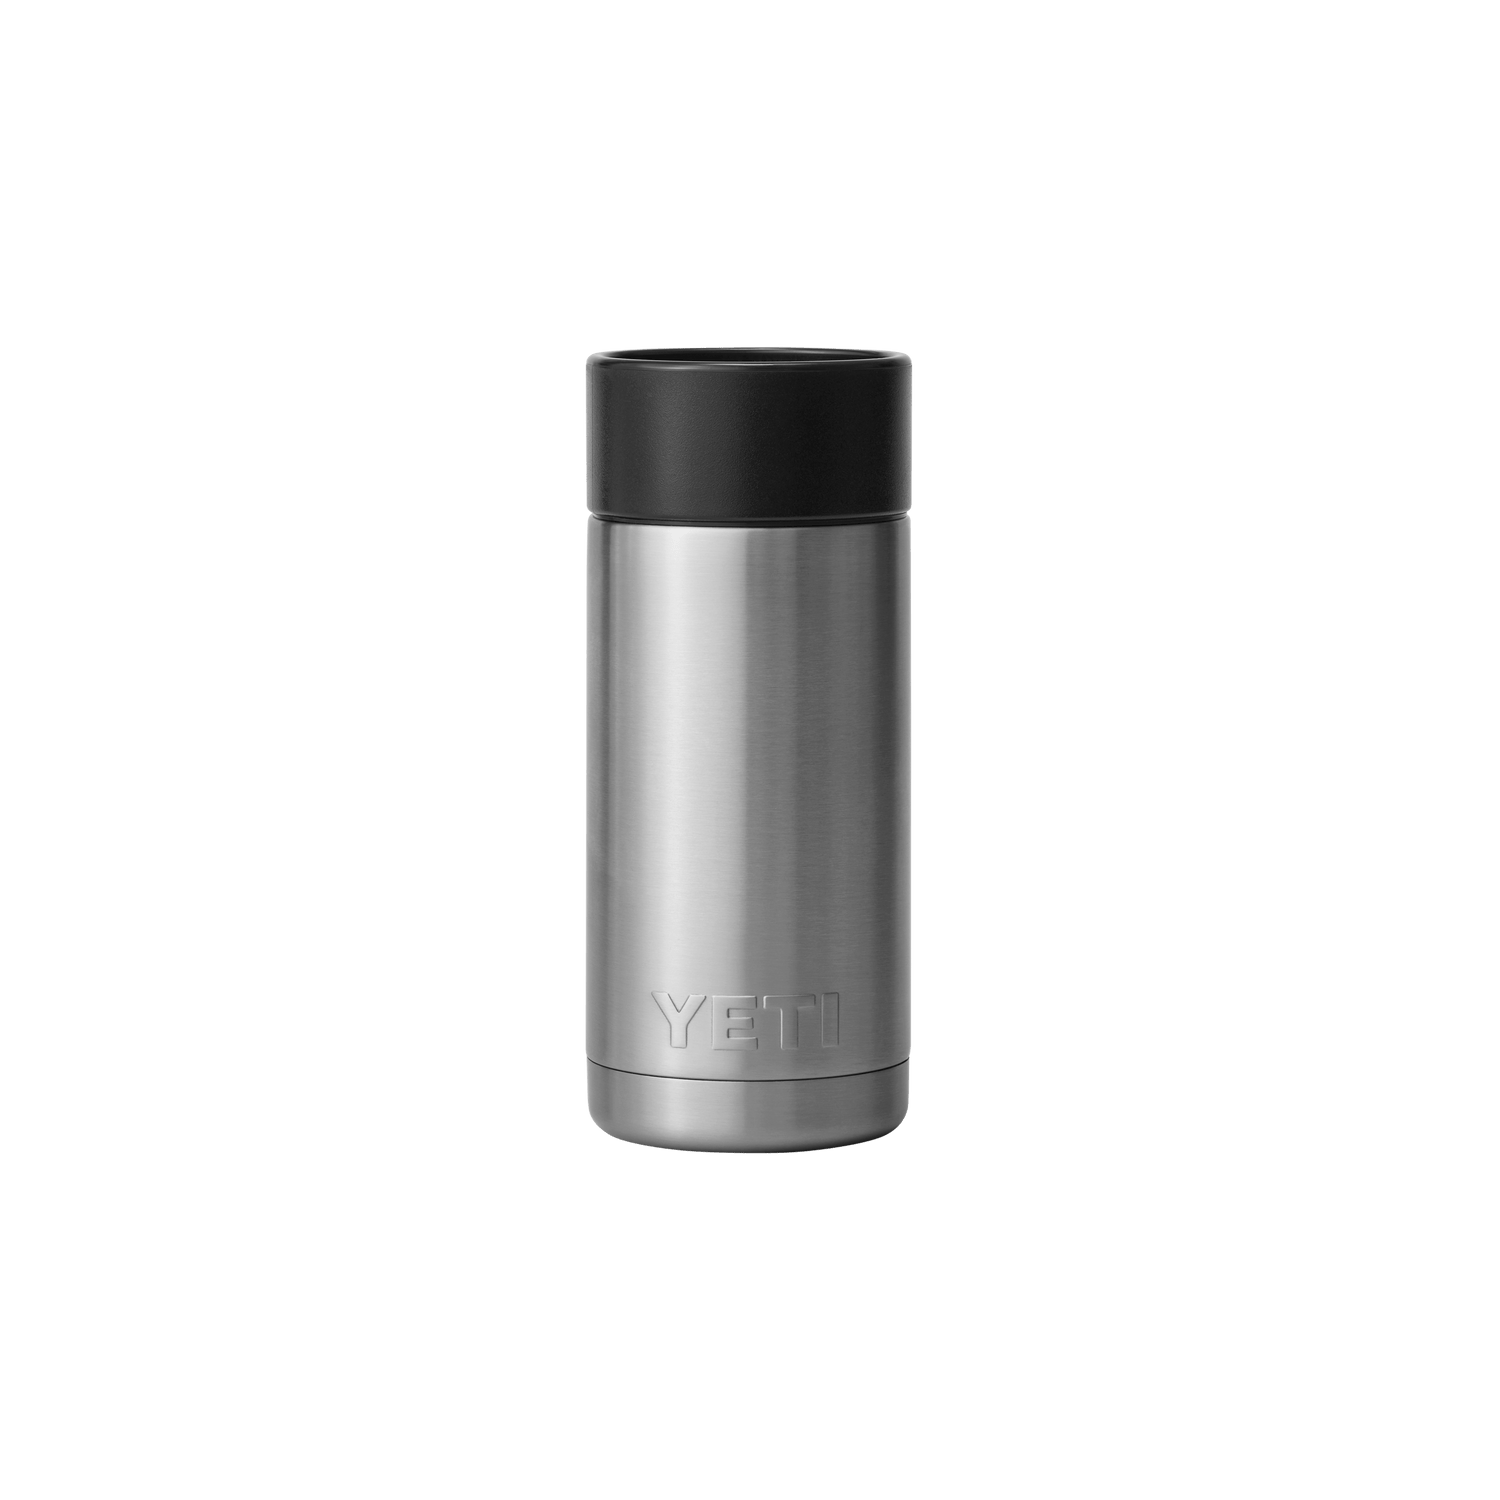  YETI Rambler 12 oz Bottle, Stainless Steel, Vacuum Insulated,  with Hot Shot Cap, Canopy Green: Home & Kitchen